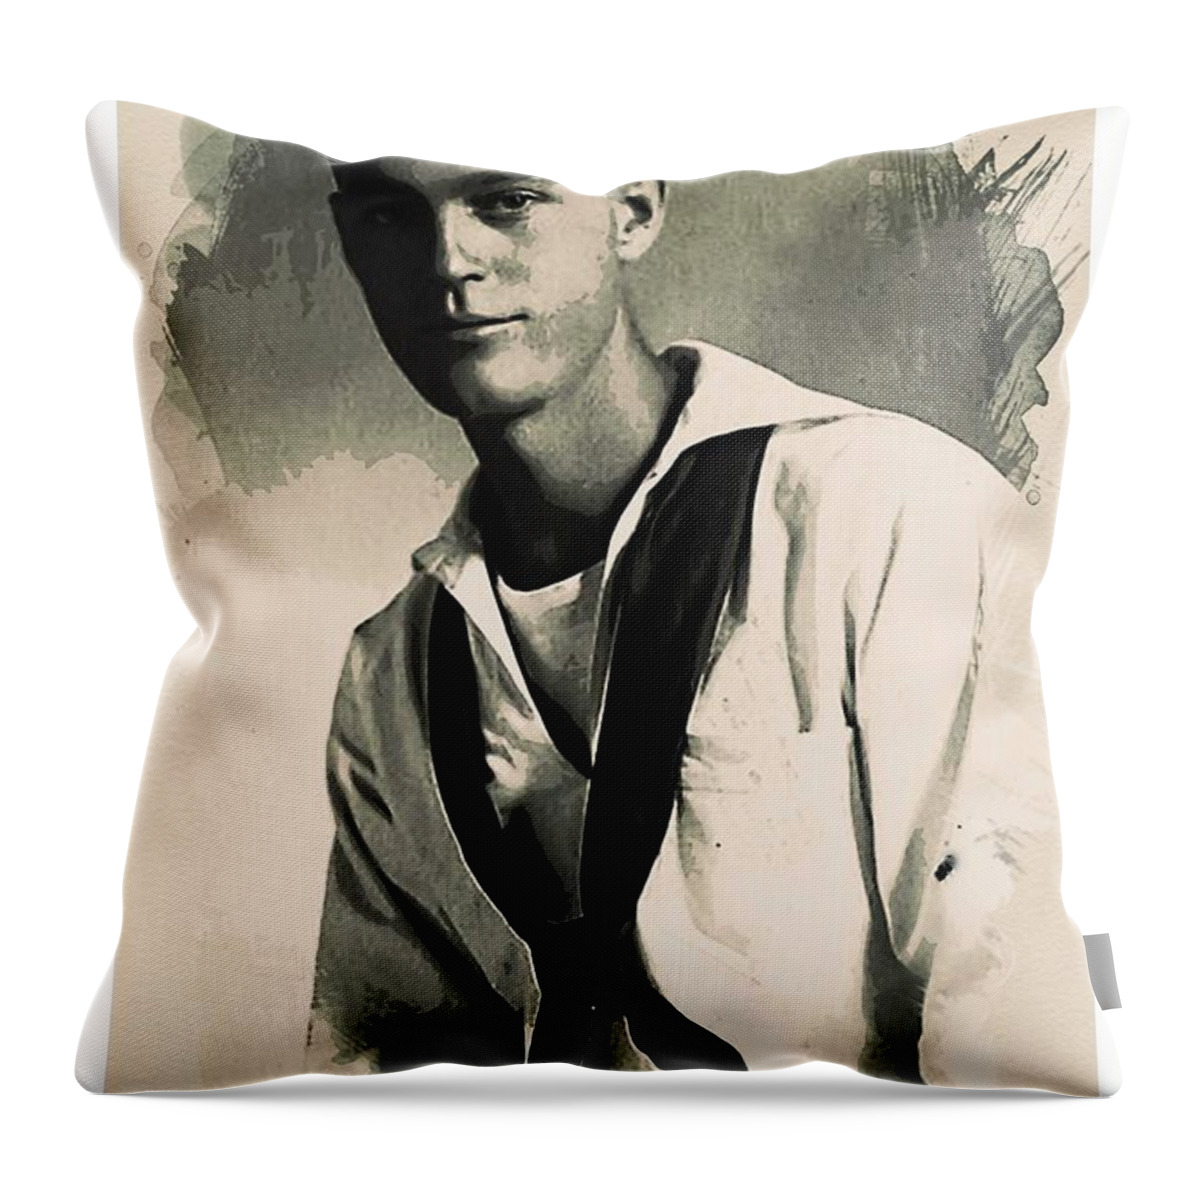 Man Throw Pillow featuring the painting Young Faces from the past Series by Adam Asar, No 63 by Celestial Images